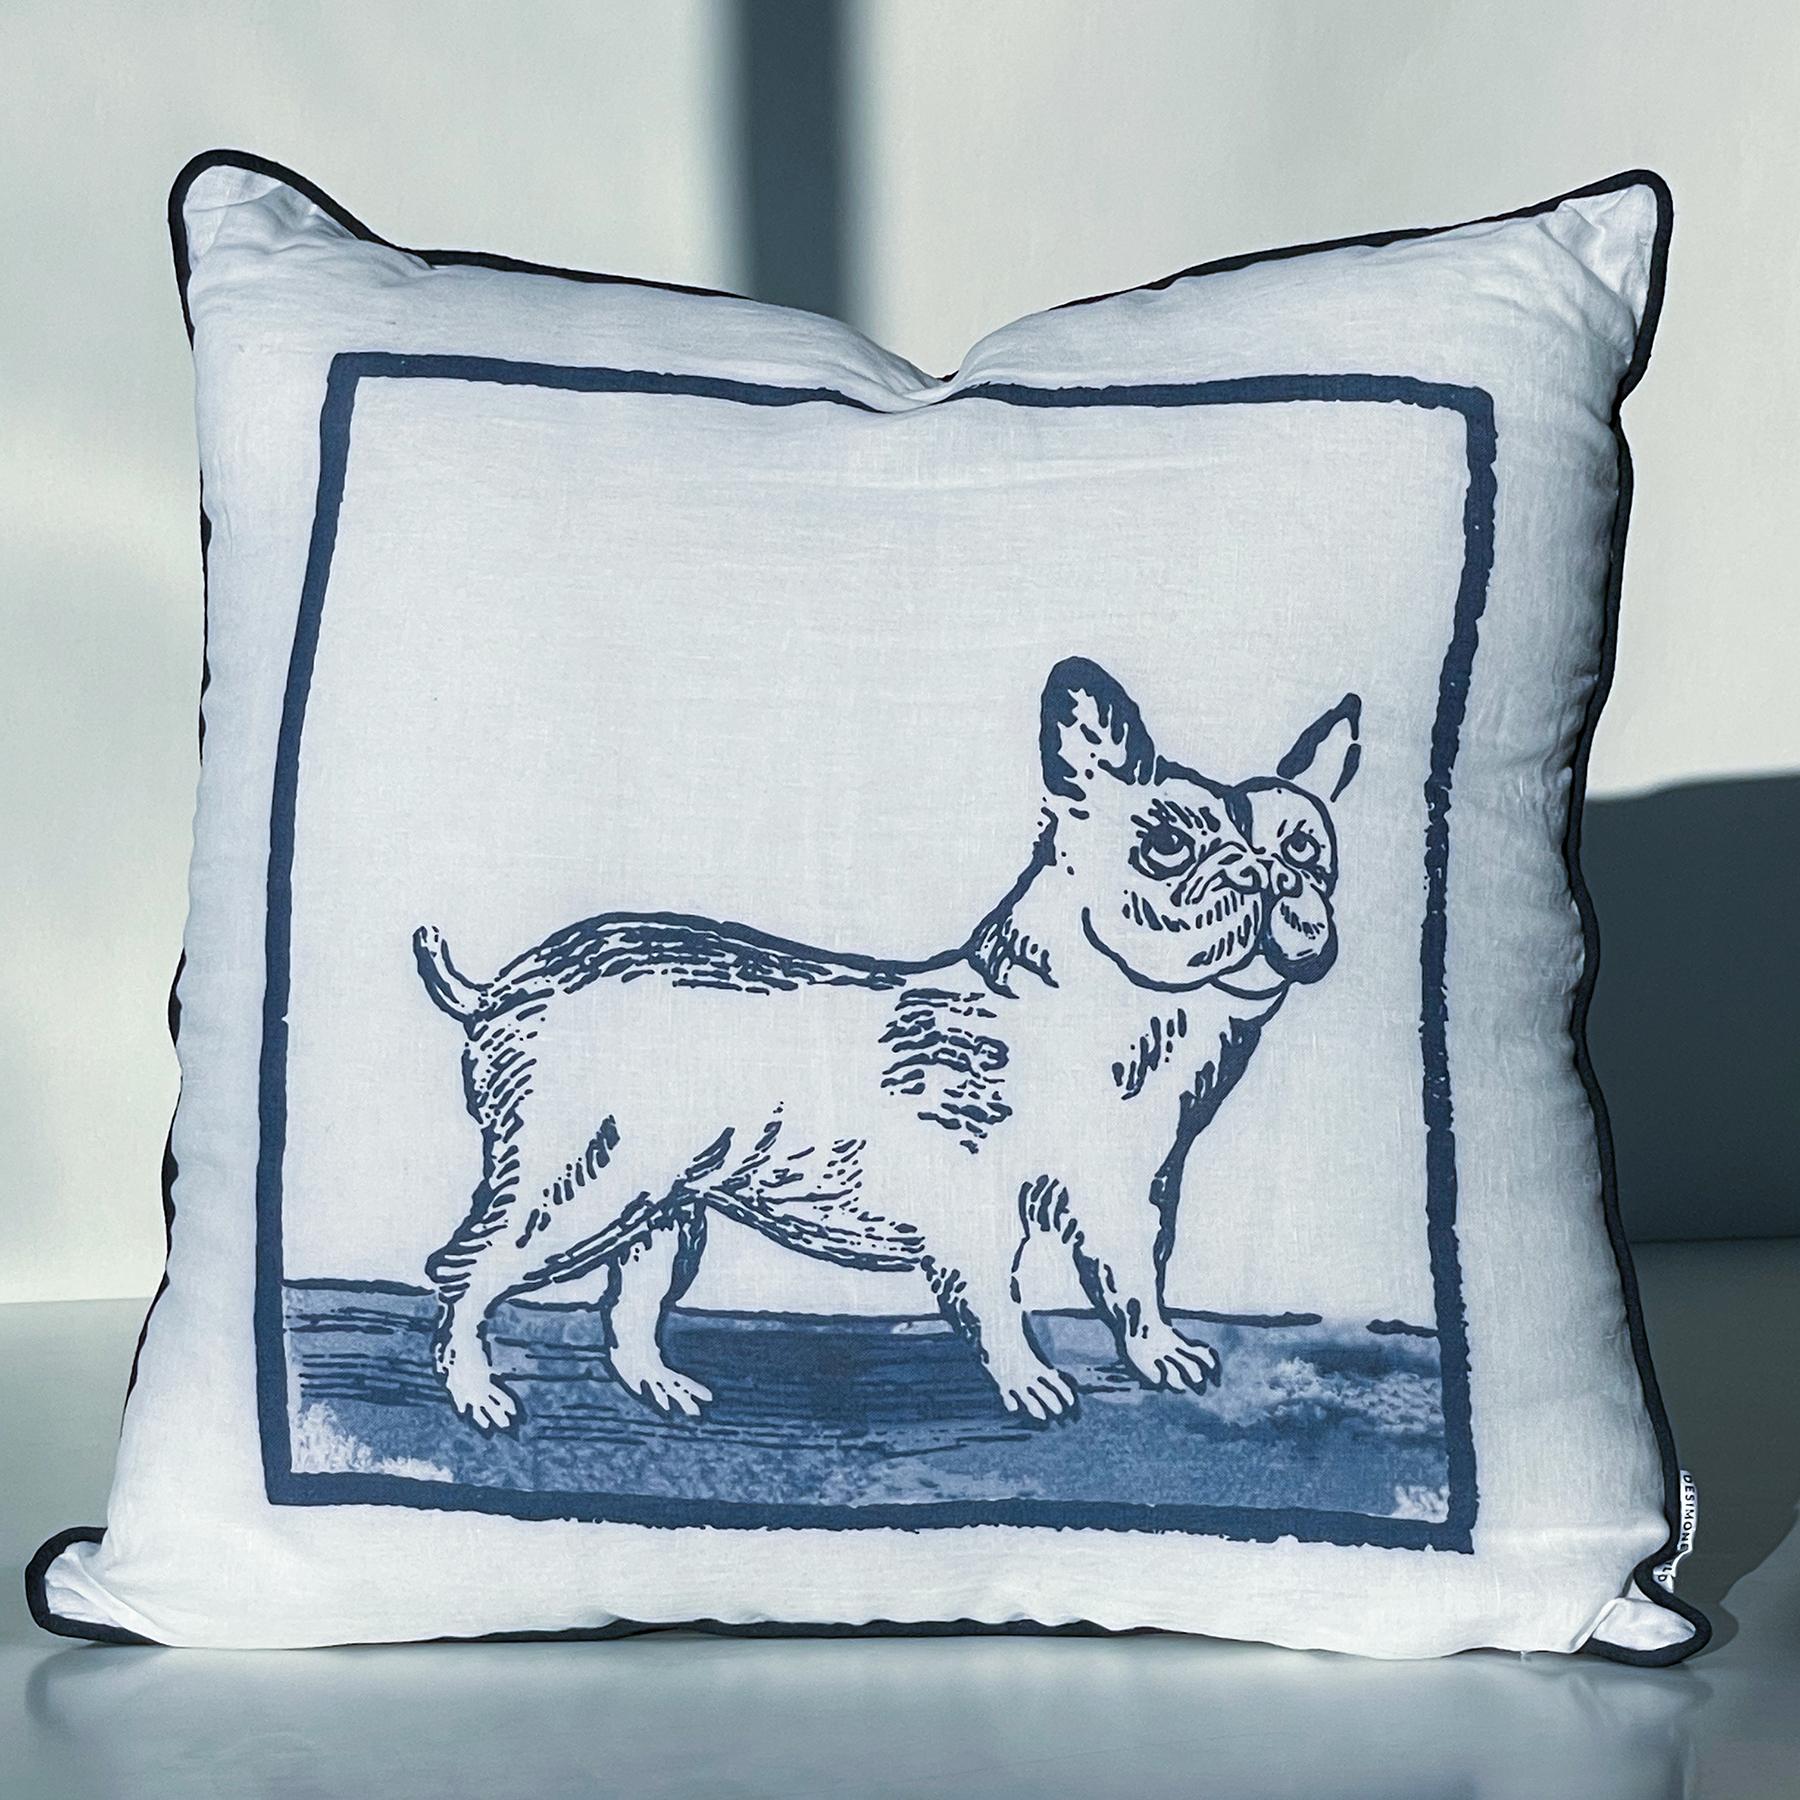 The perfect pillow for all dog lovers, this charming design features a funny looking Bolognese dog.

It belongs to a collection of several different dog breeds from 18th century Dutch illustrations.

This design is elegant, colorful and